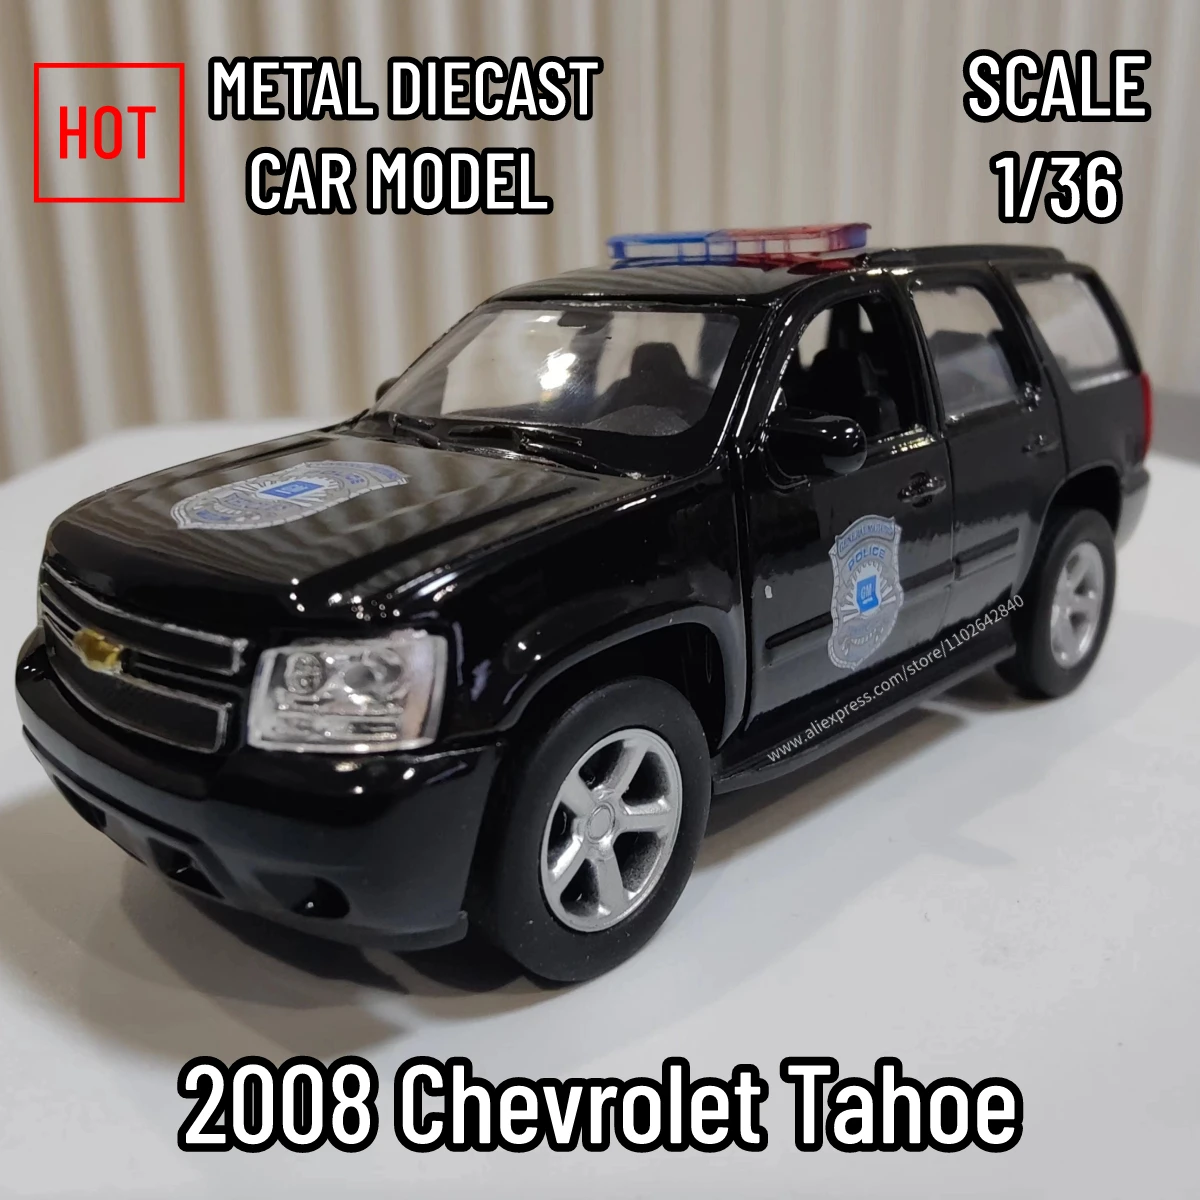 

Scale 1/36 Replica 2008 Chevrolet Tahoe Car Model Scale Diecast Vehicle Collection Home Interior Decor Xmas Gift Kid Boy Toy